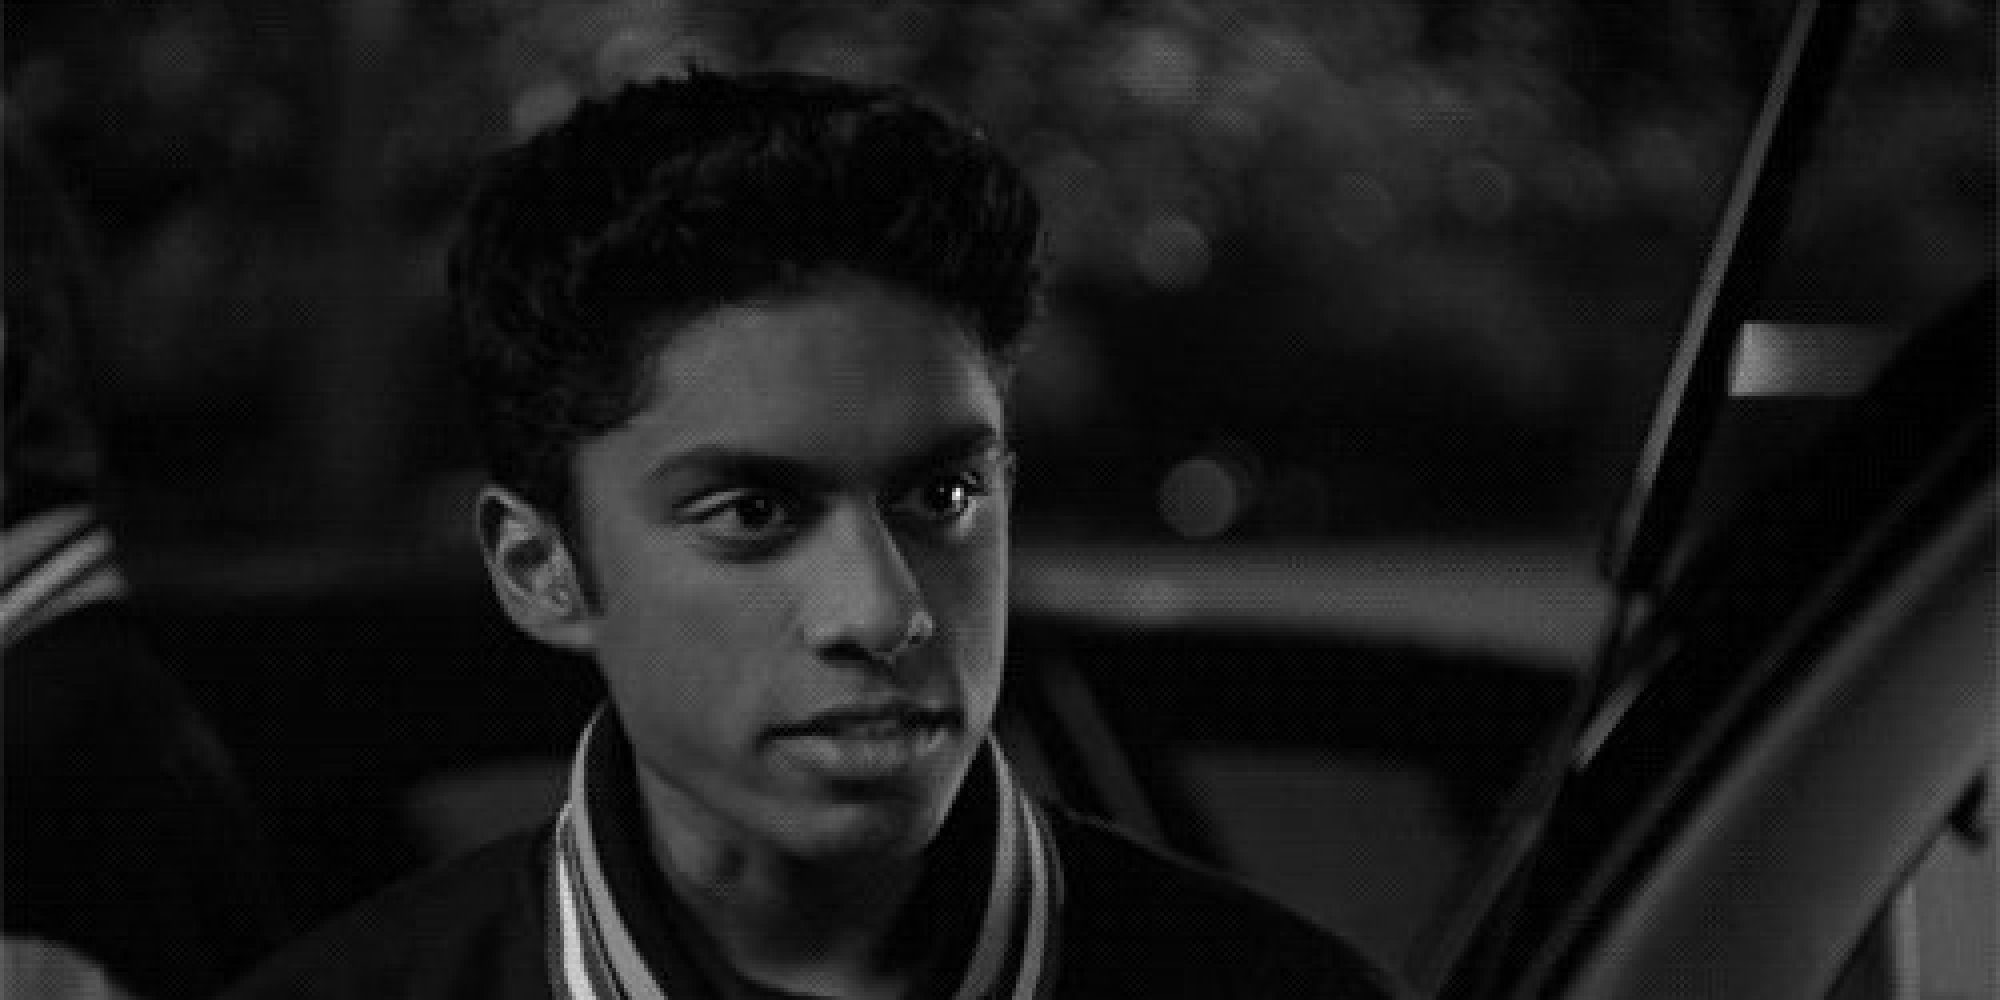 Kevin G From Mean Girls, AKA Rajiv Surendra, Is Now A 